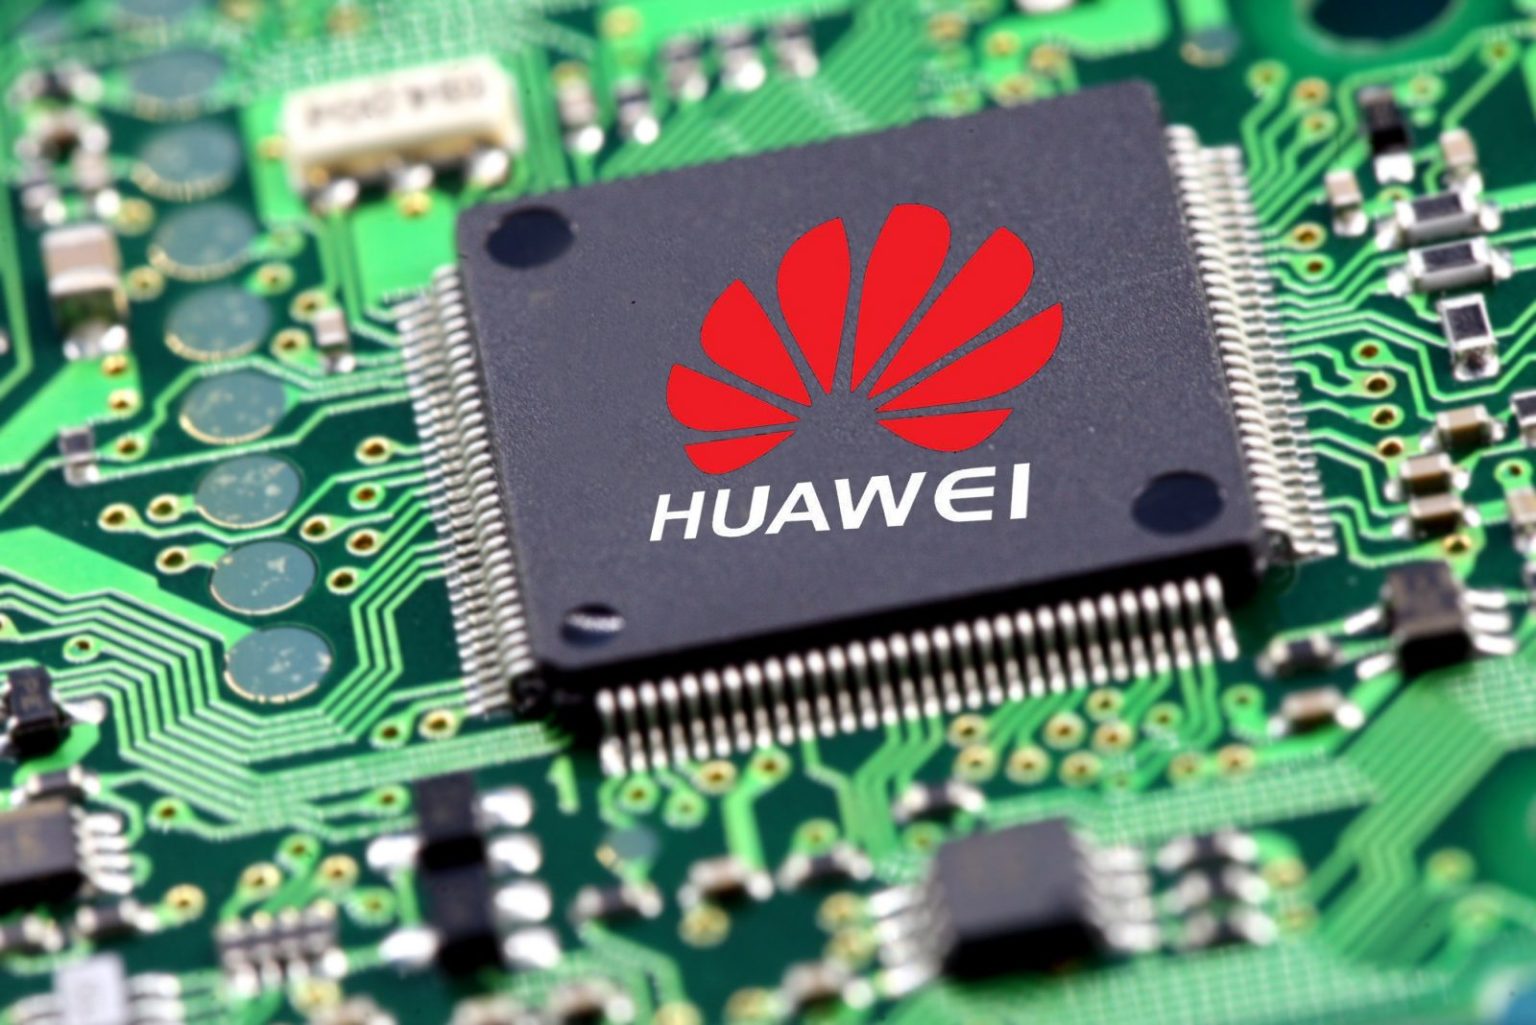 Political pressure mounts as Republicans push for tougher Huawei stance (Credits: Asia Financial)